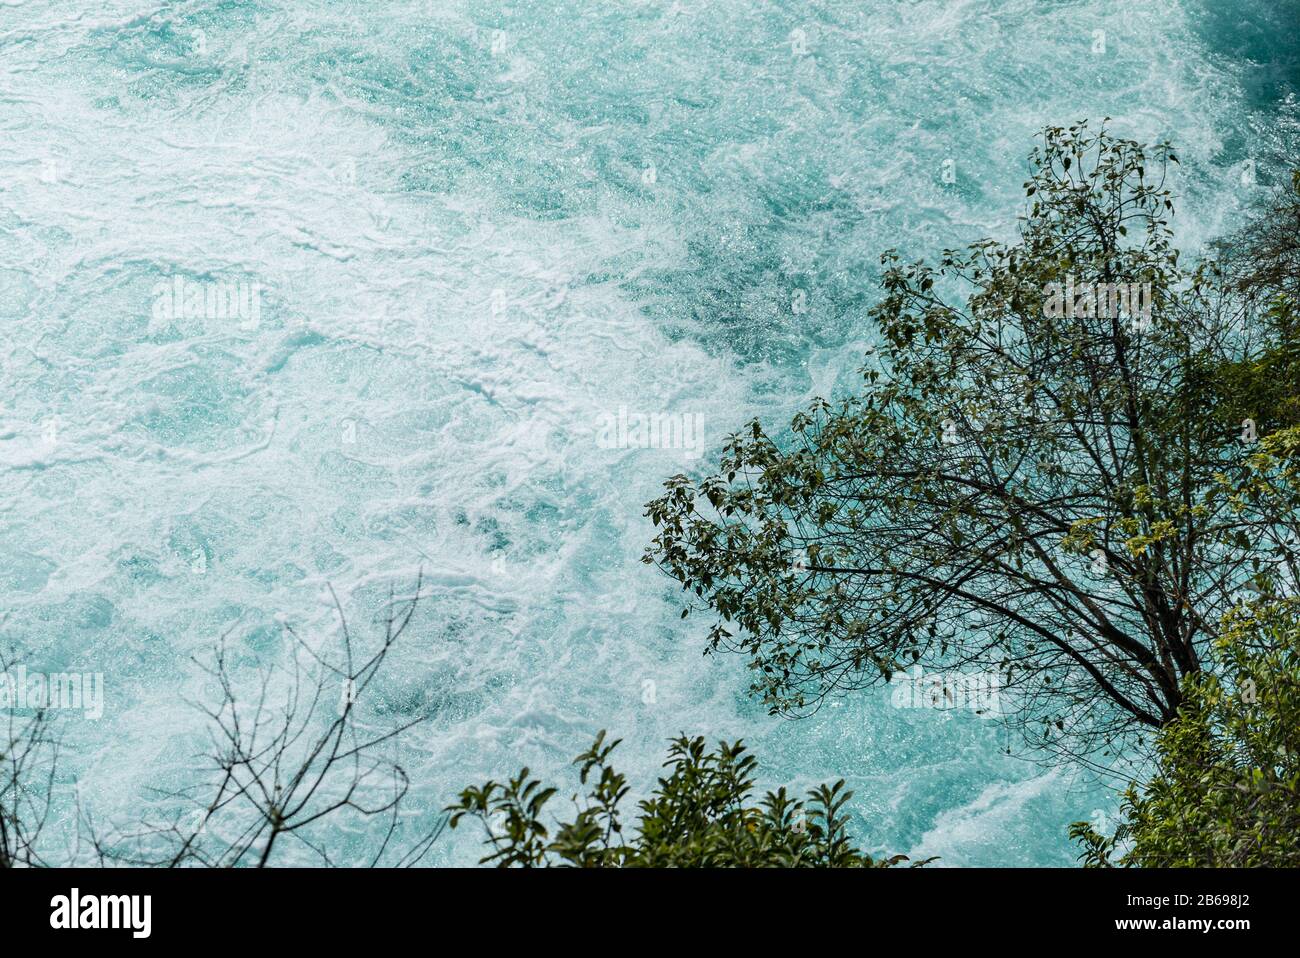 Vegation hangs over the turbulent waters at the base of the Huka Falls near Taupo, New Zealand Stock Photo